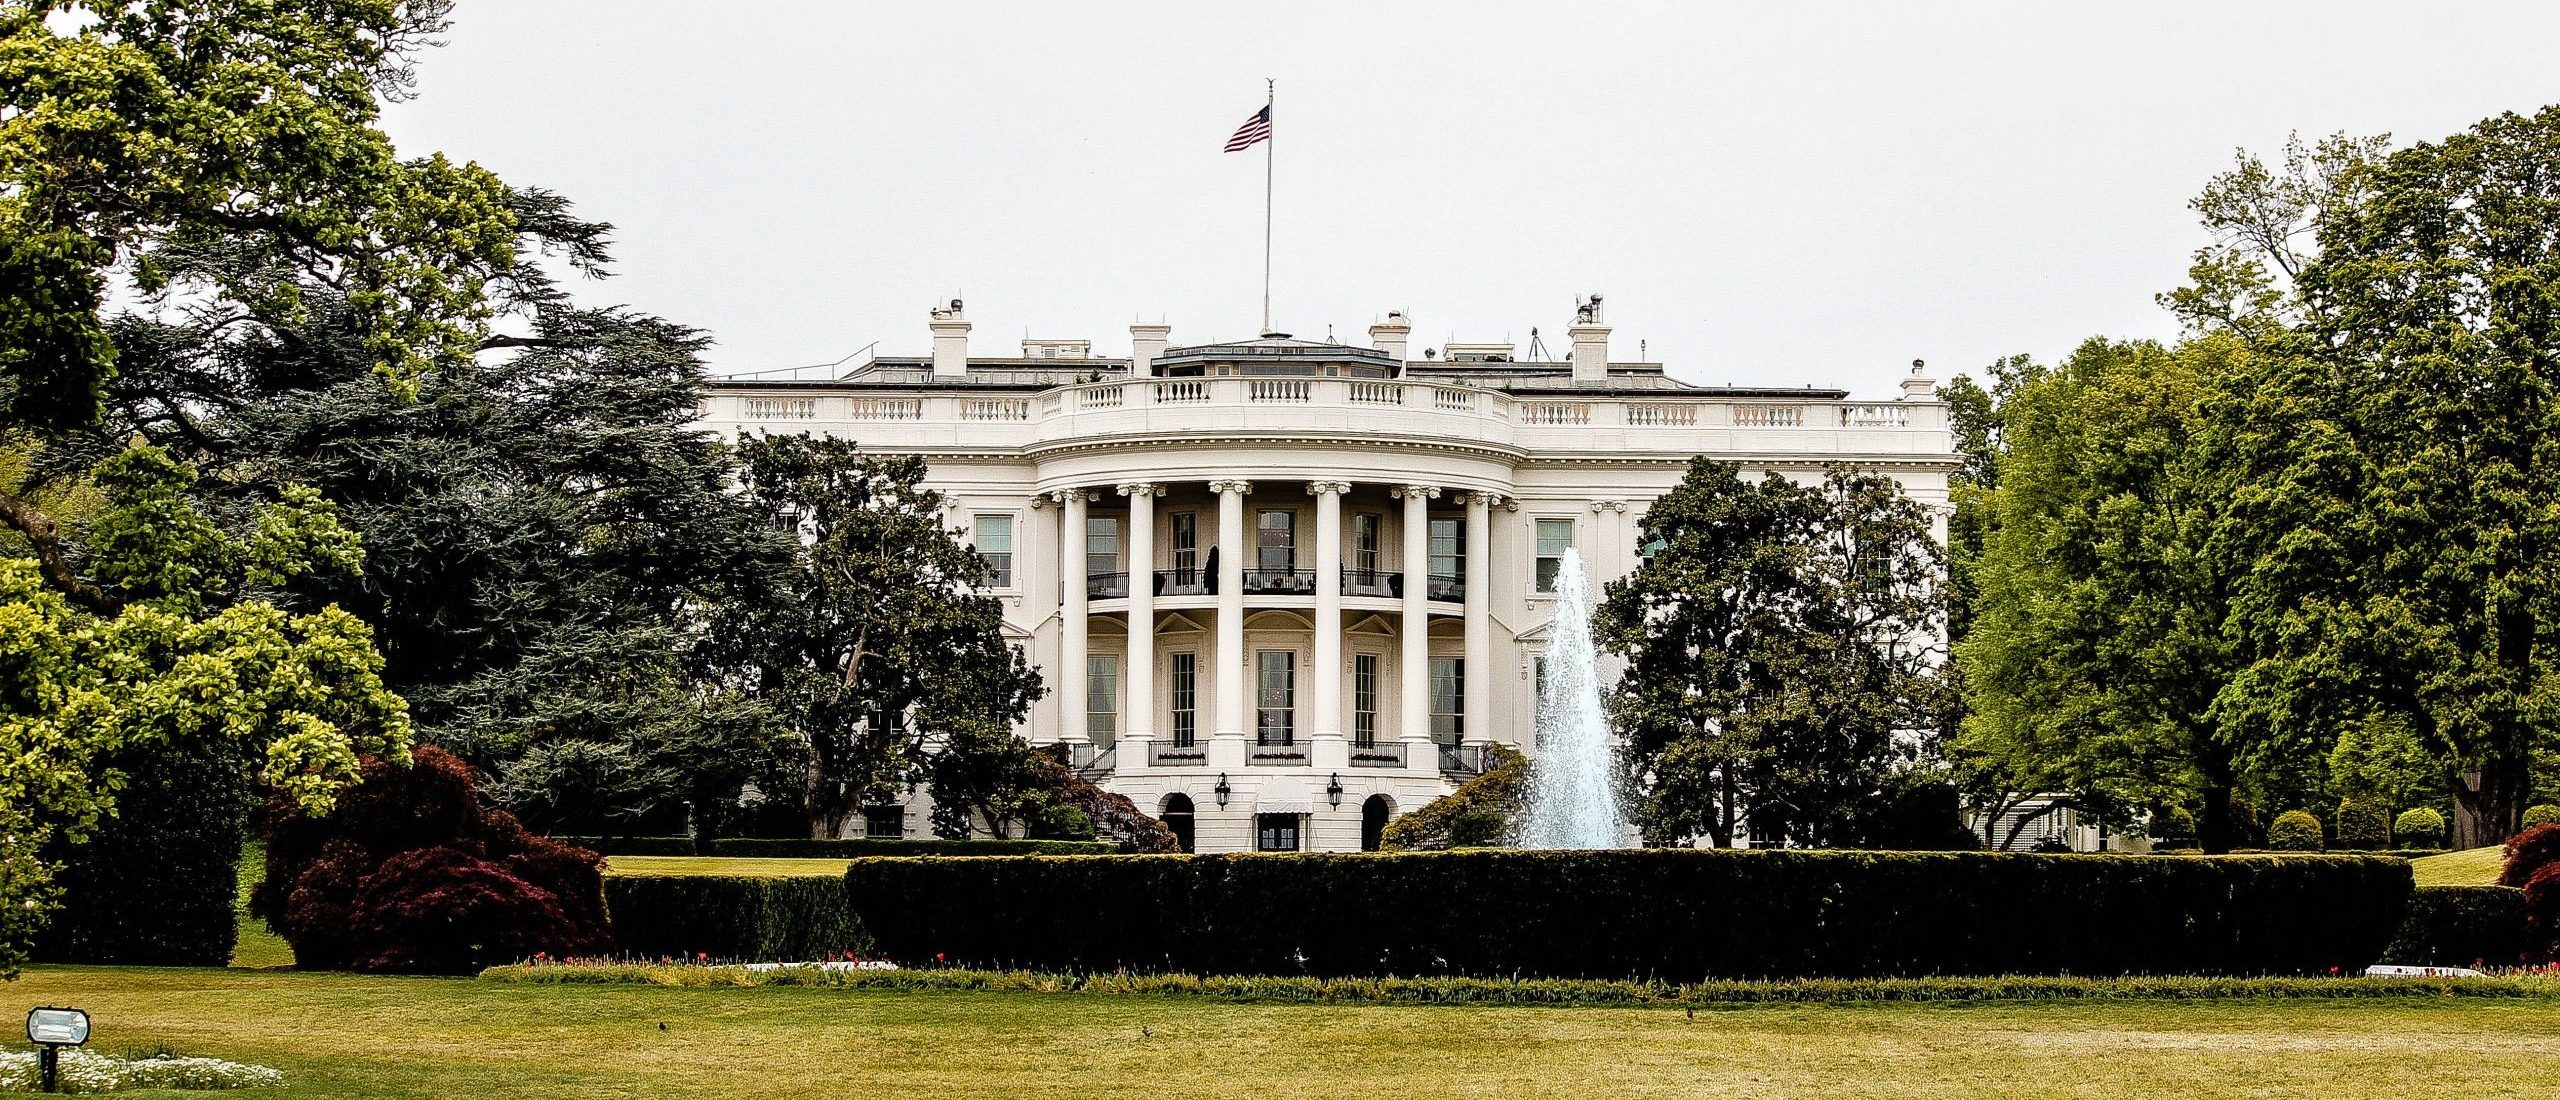 Image of the White House during the day